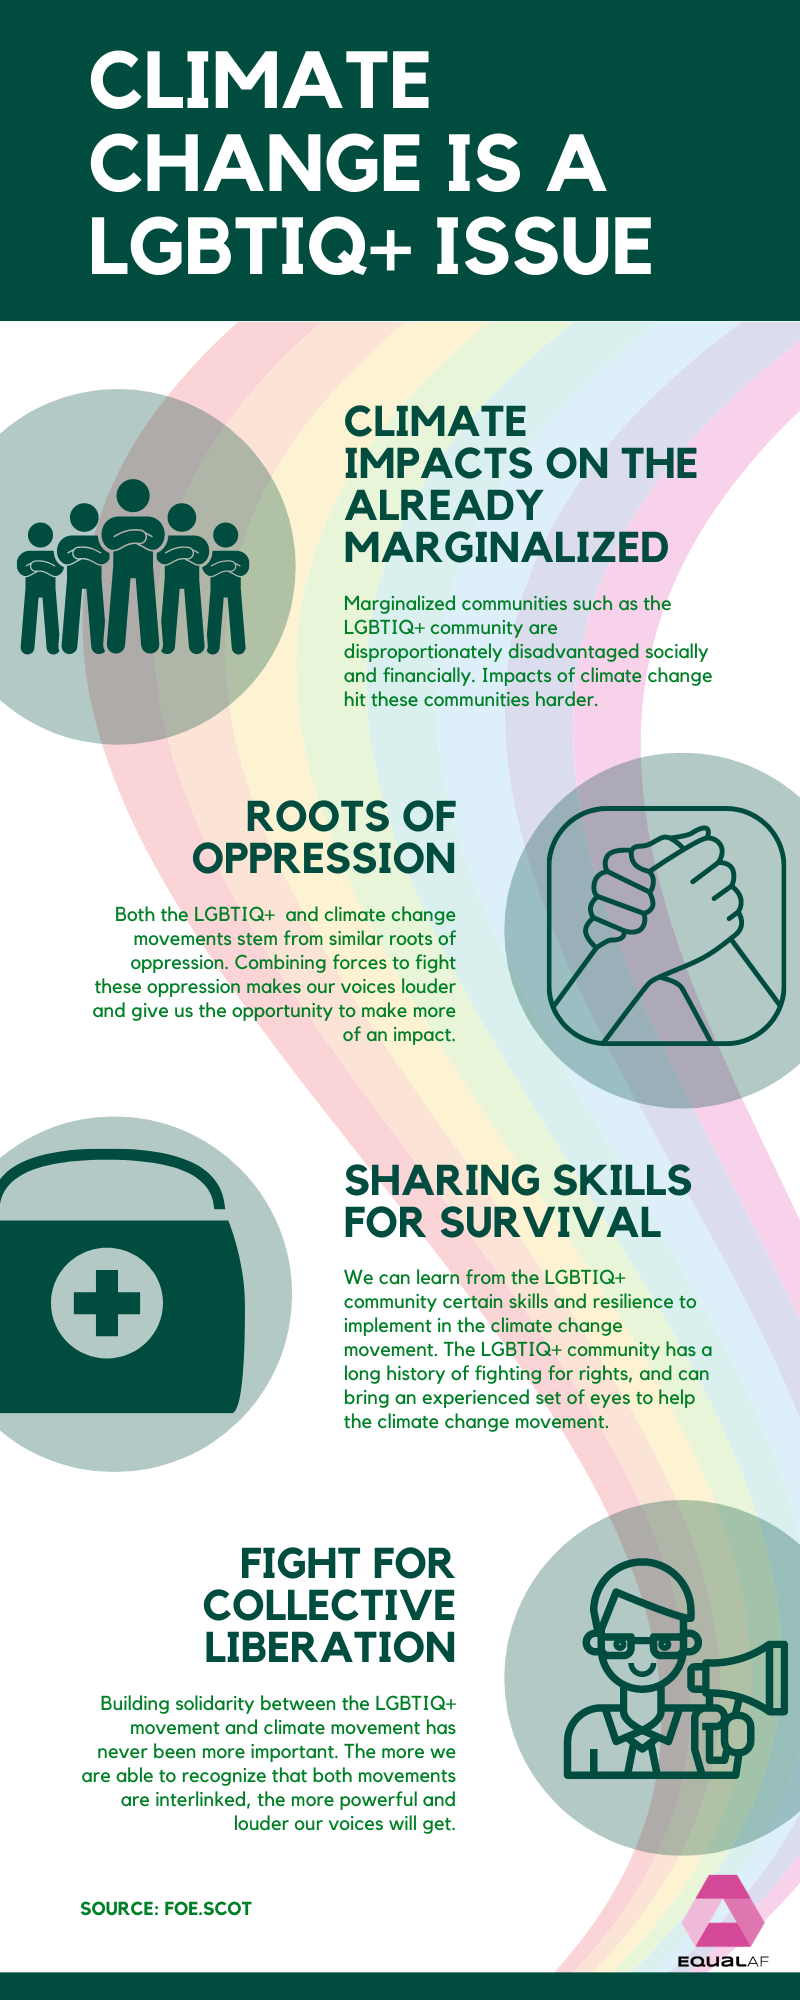 An infographic about why climate change is an LGBTIQ+ issue